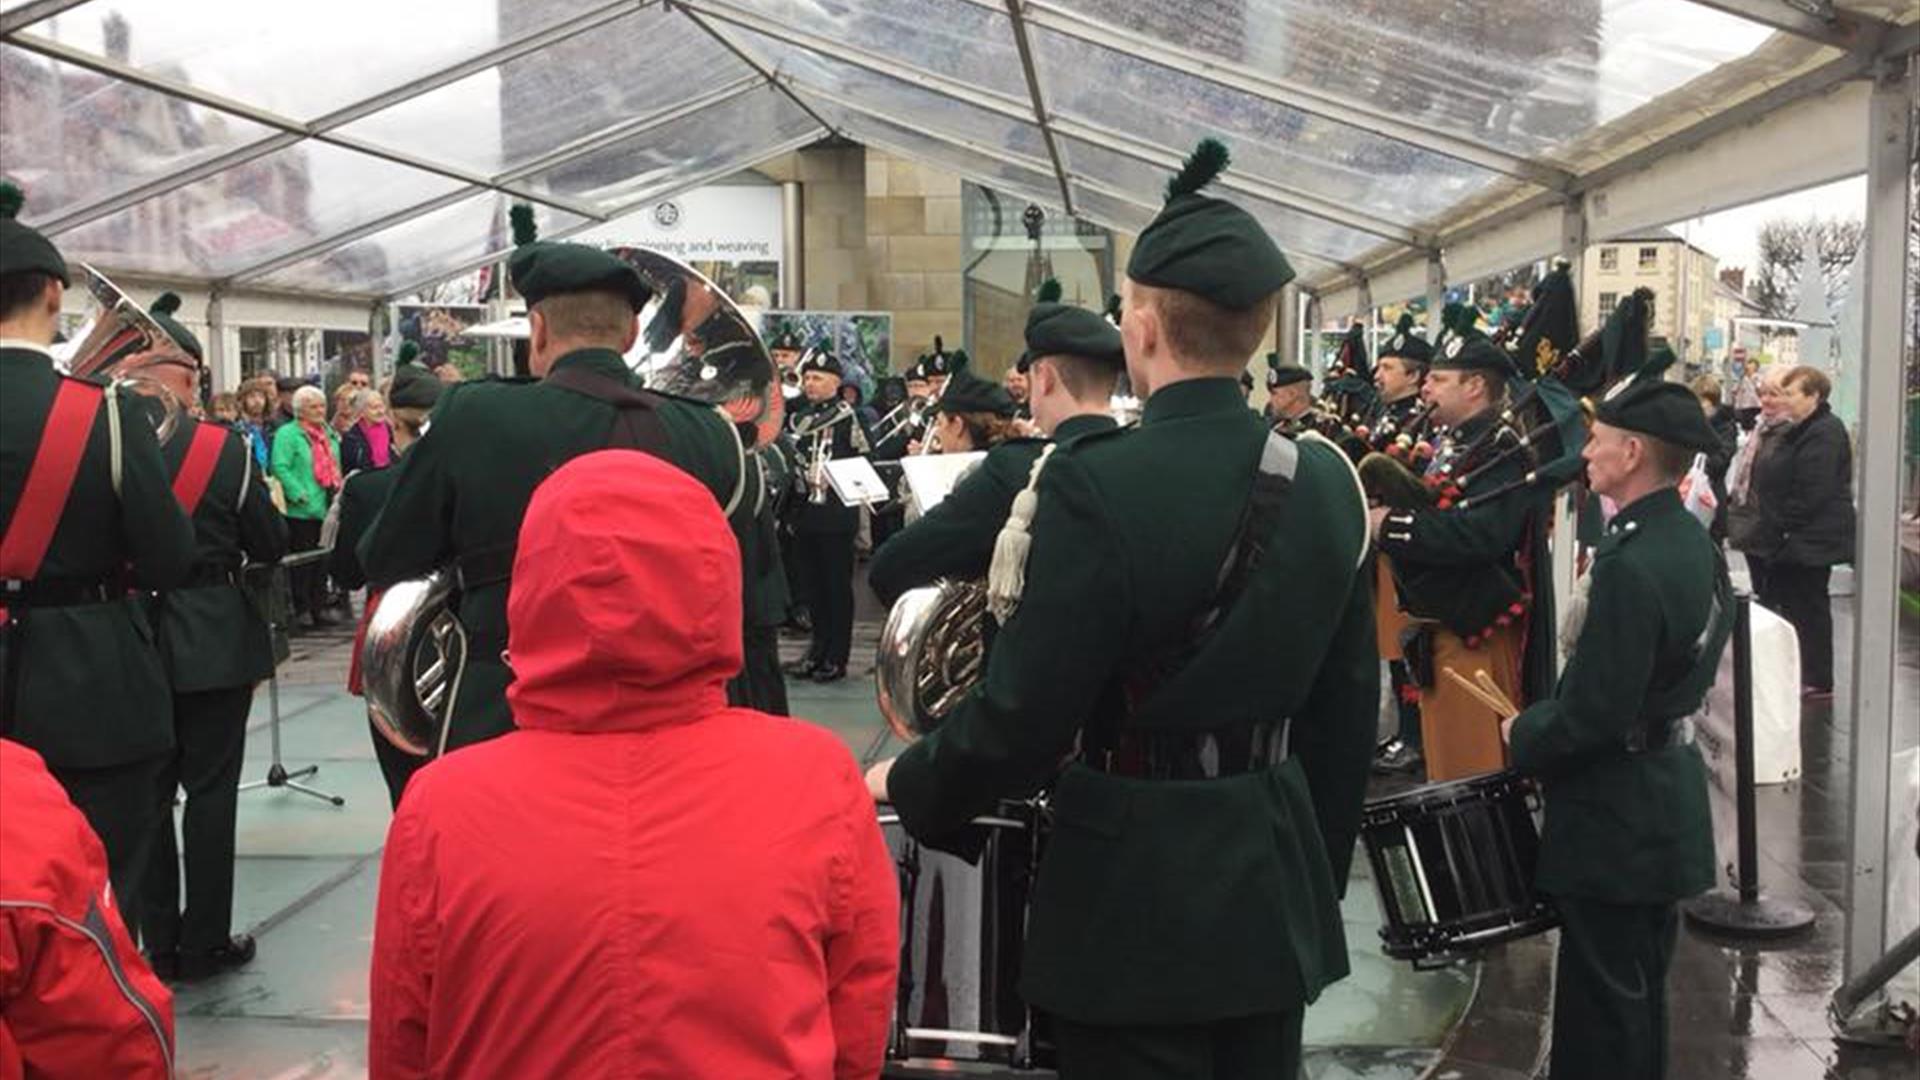 The Band of the Royal Irish Regiment performing for an audience in Market Square Lisburn